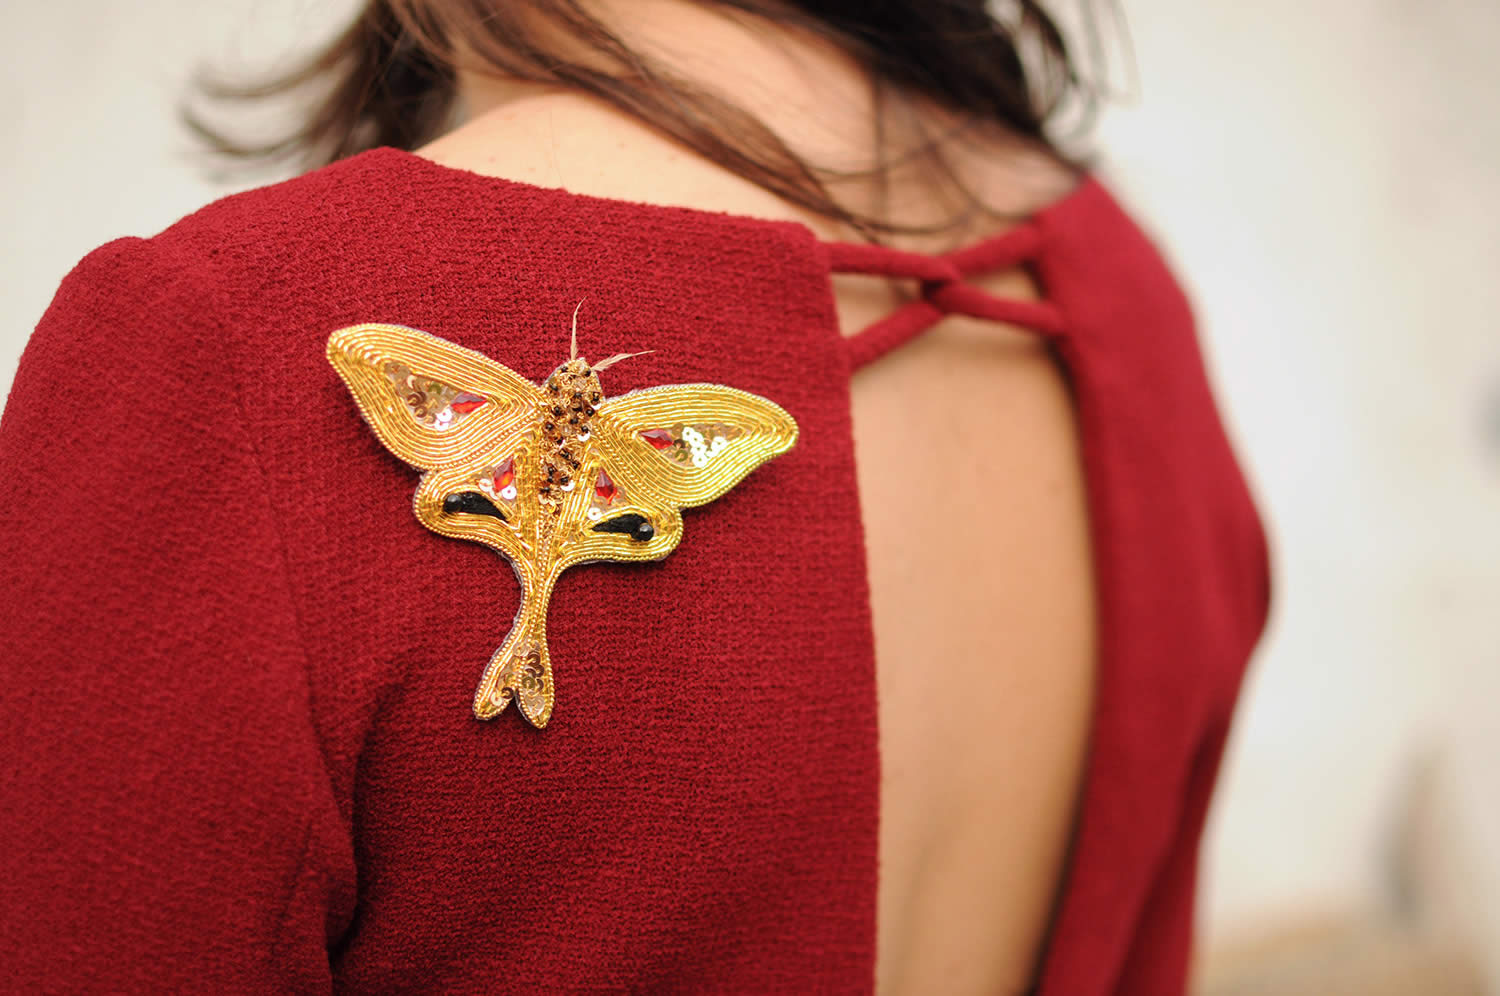 Hand-embroidered moth brooch - Goldwork Couture Embroidery - detail